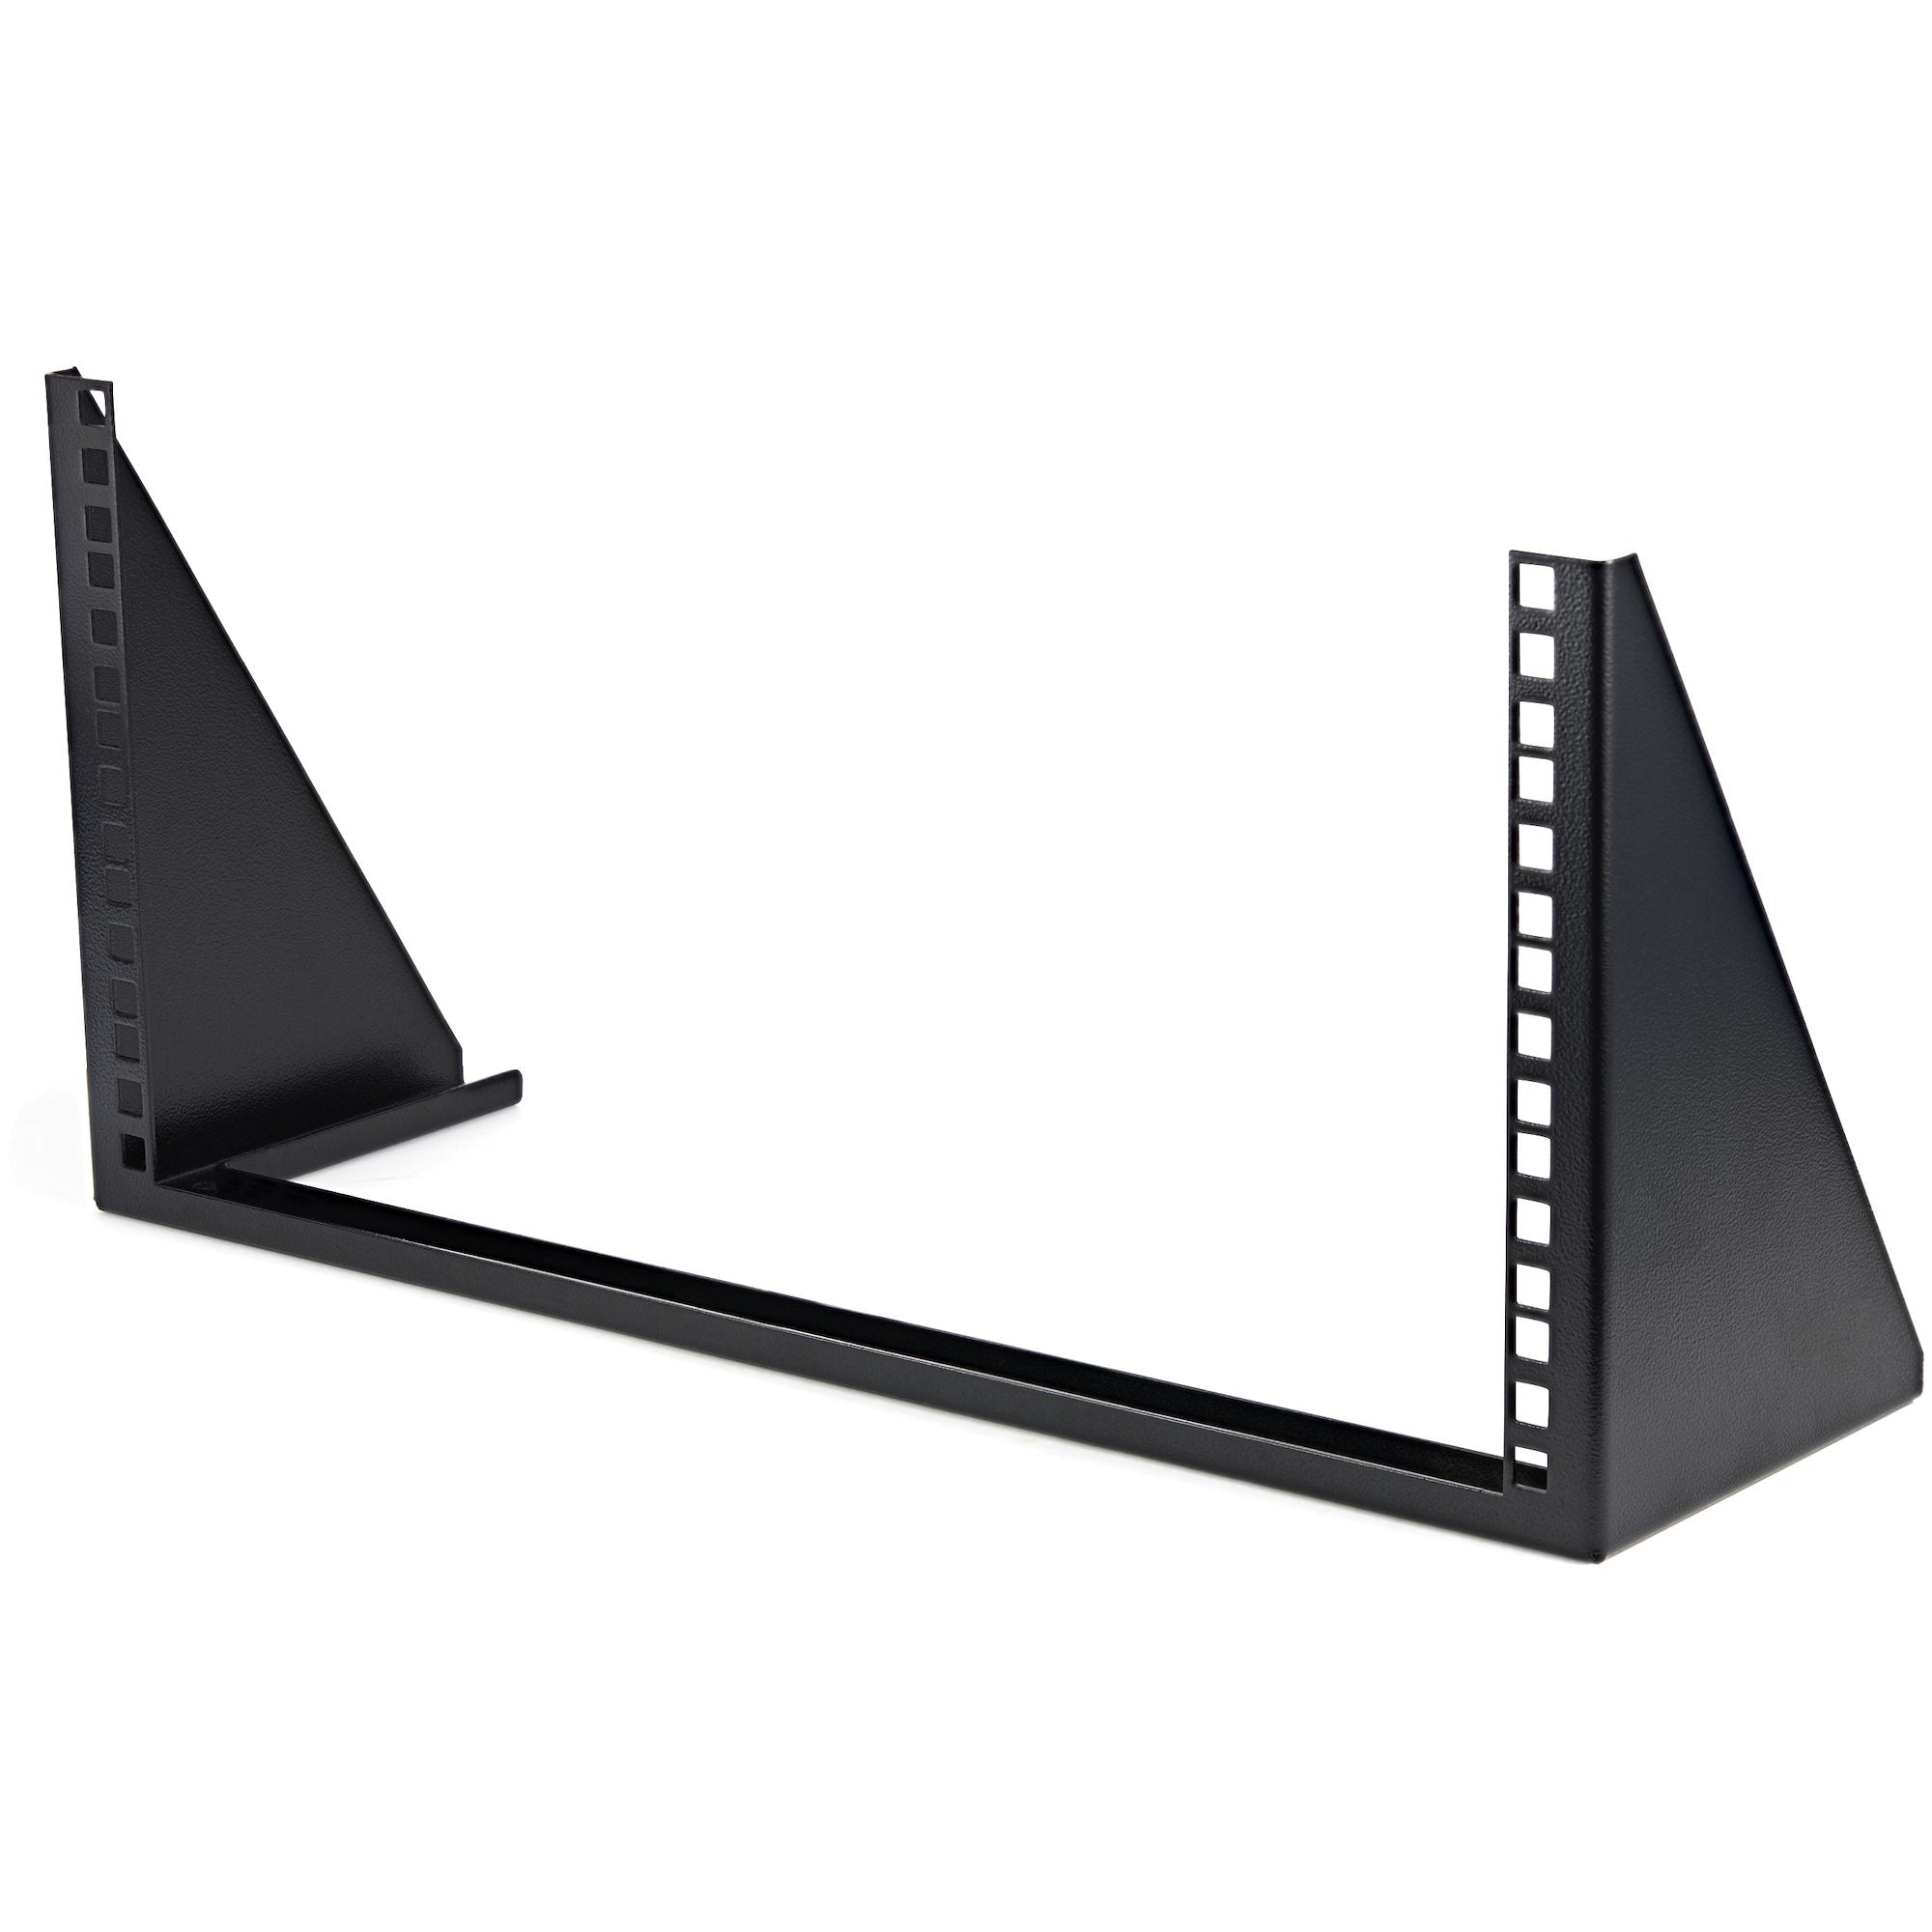 4U Wall Mount Network Rack - 14 Inch Deep (Low Profile) - 19 Patch Panel  Bracket for Shallow Server and IT Equipment, Network Switches - 44lbs/20kg